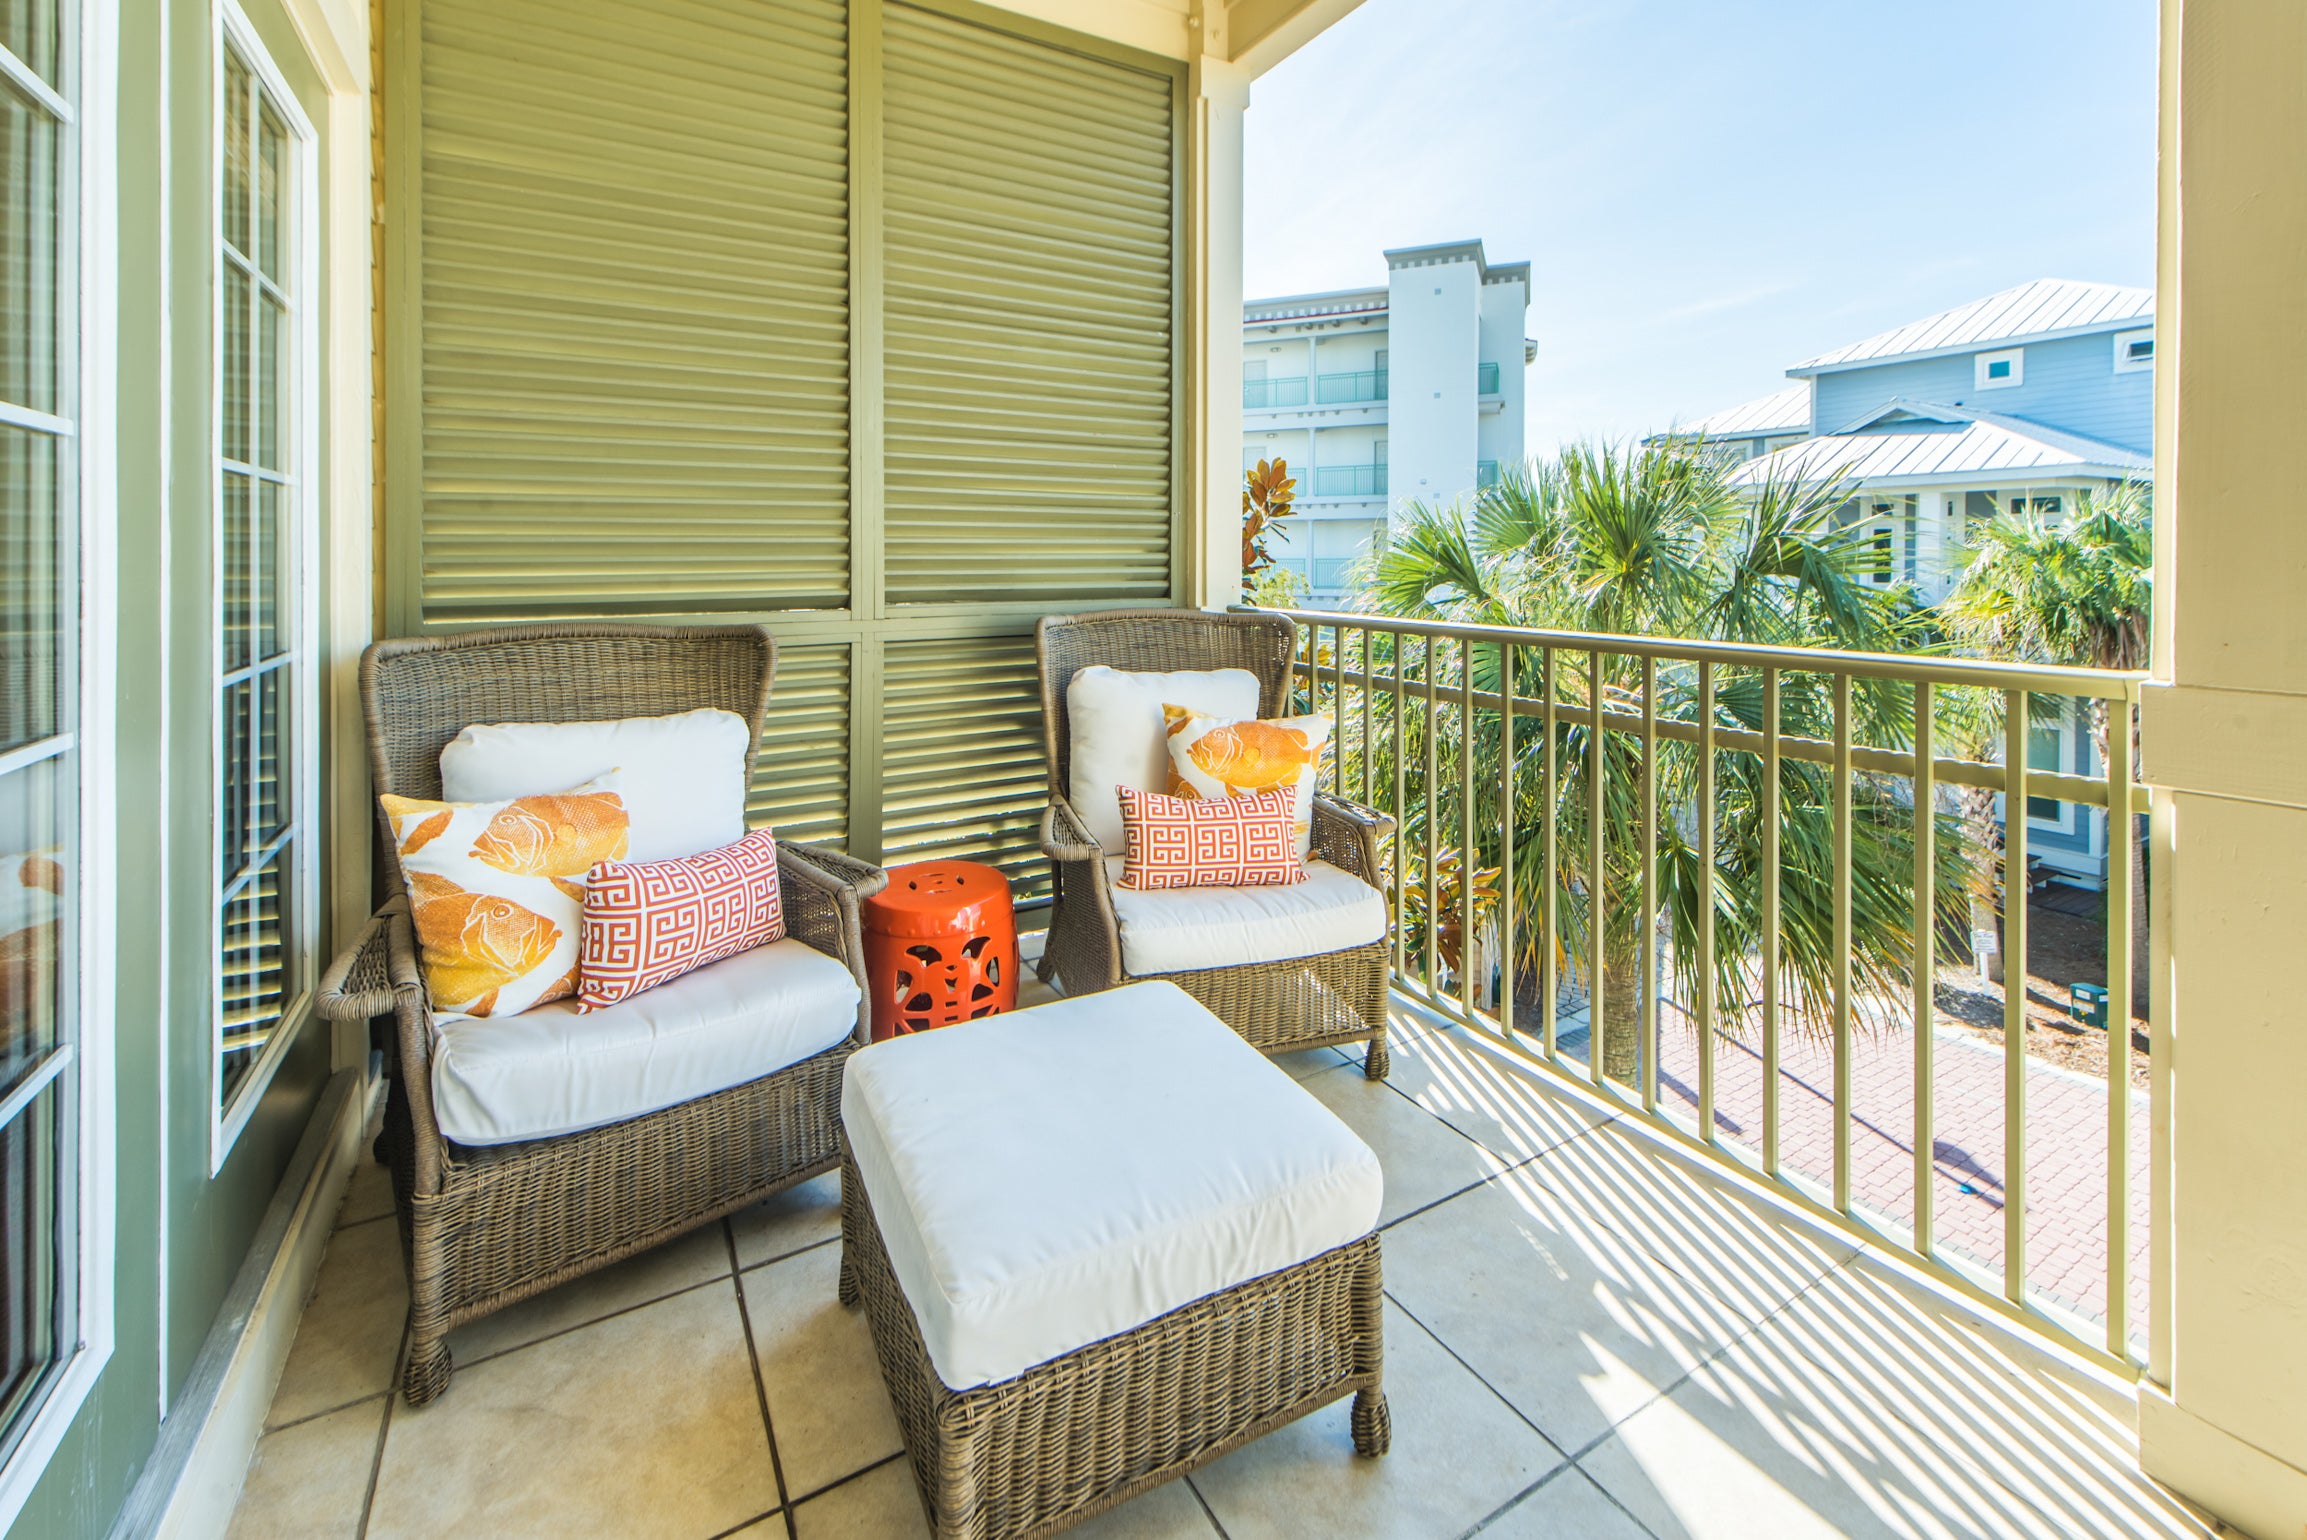 Grab some fresh air and sun out on the balcony